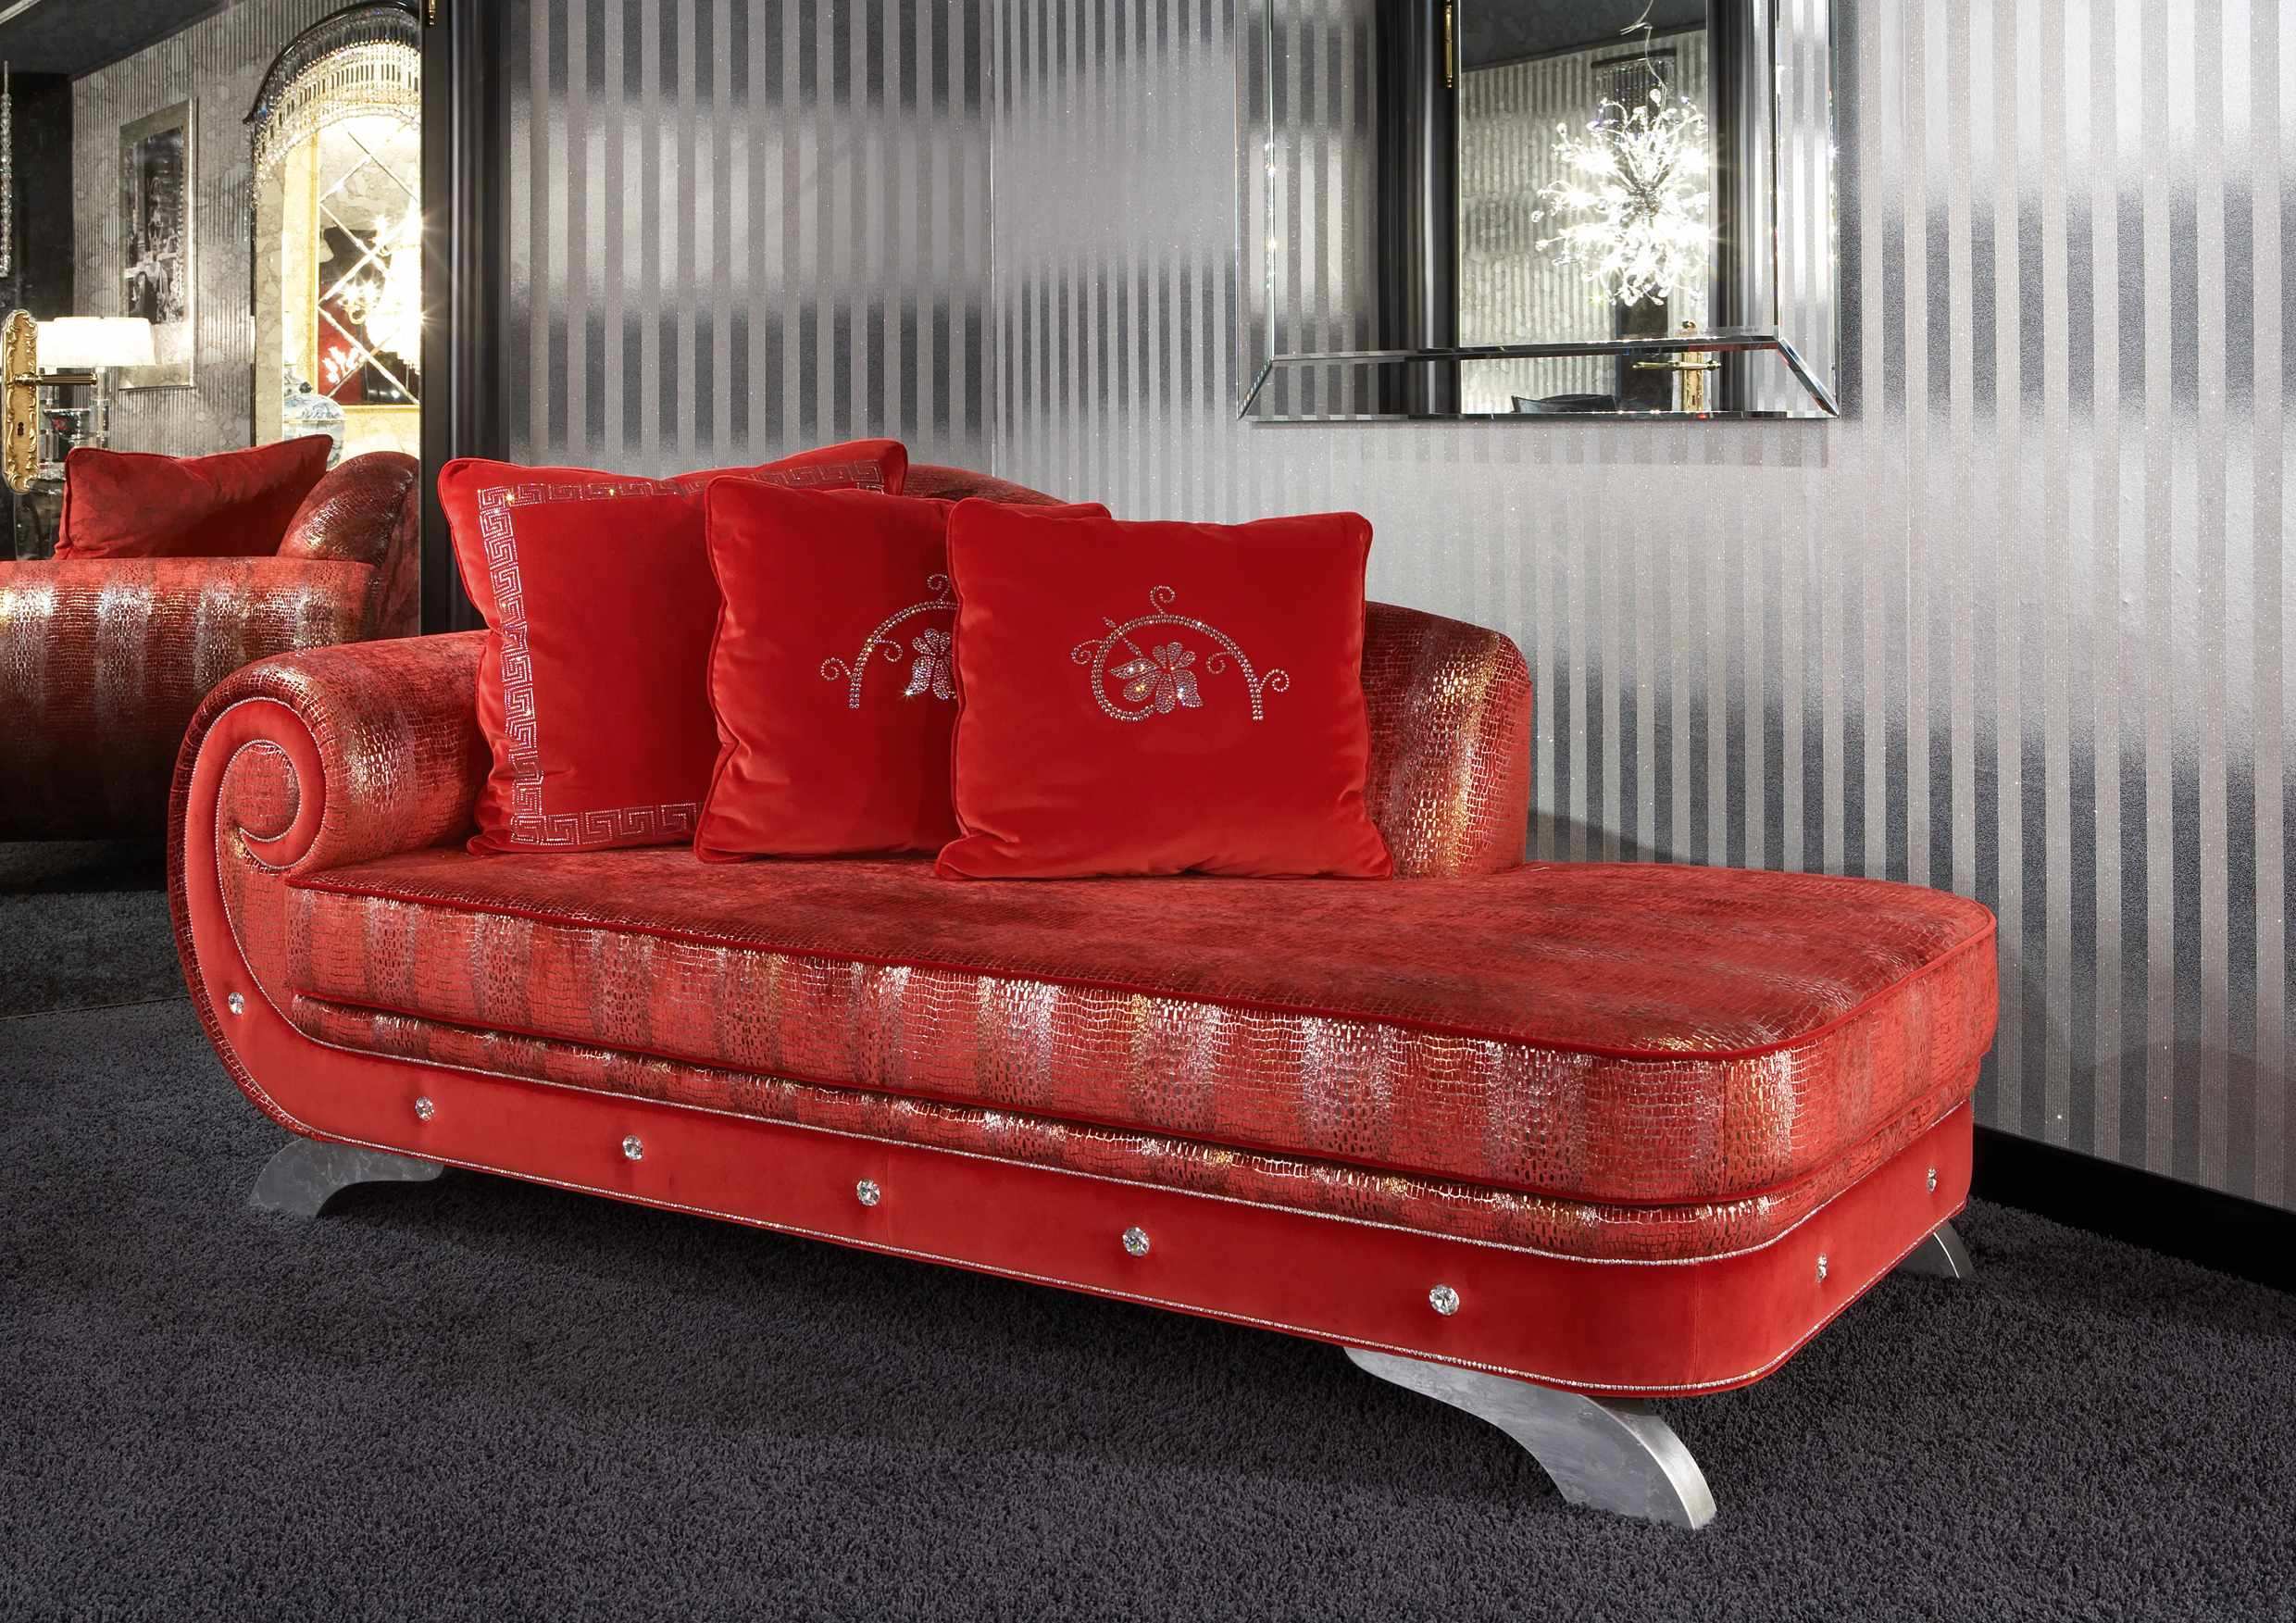 luxury-best-red-sofas-living-room-home-interior-luxury-red-living-room